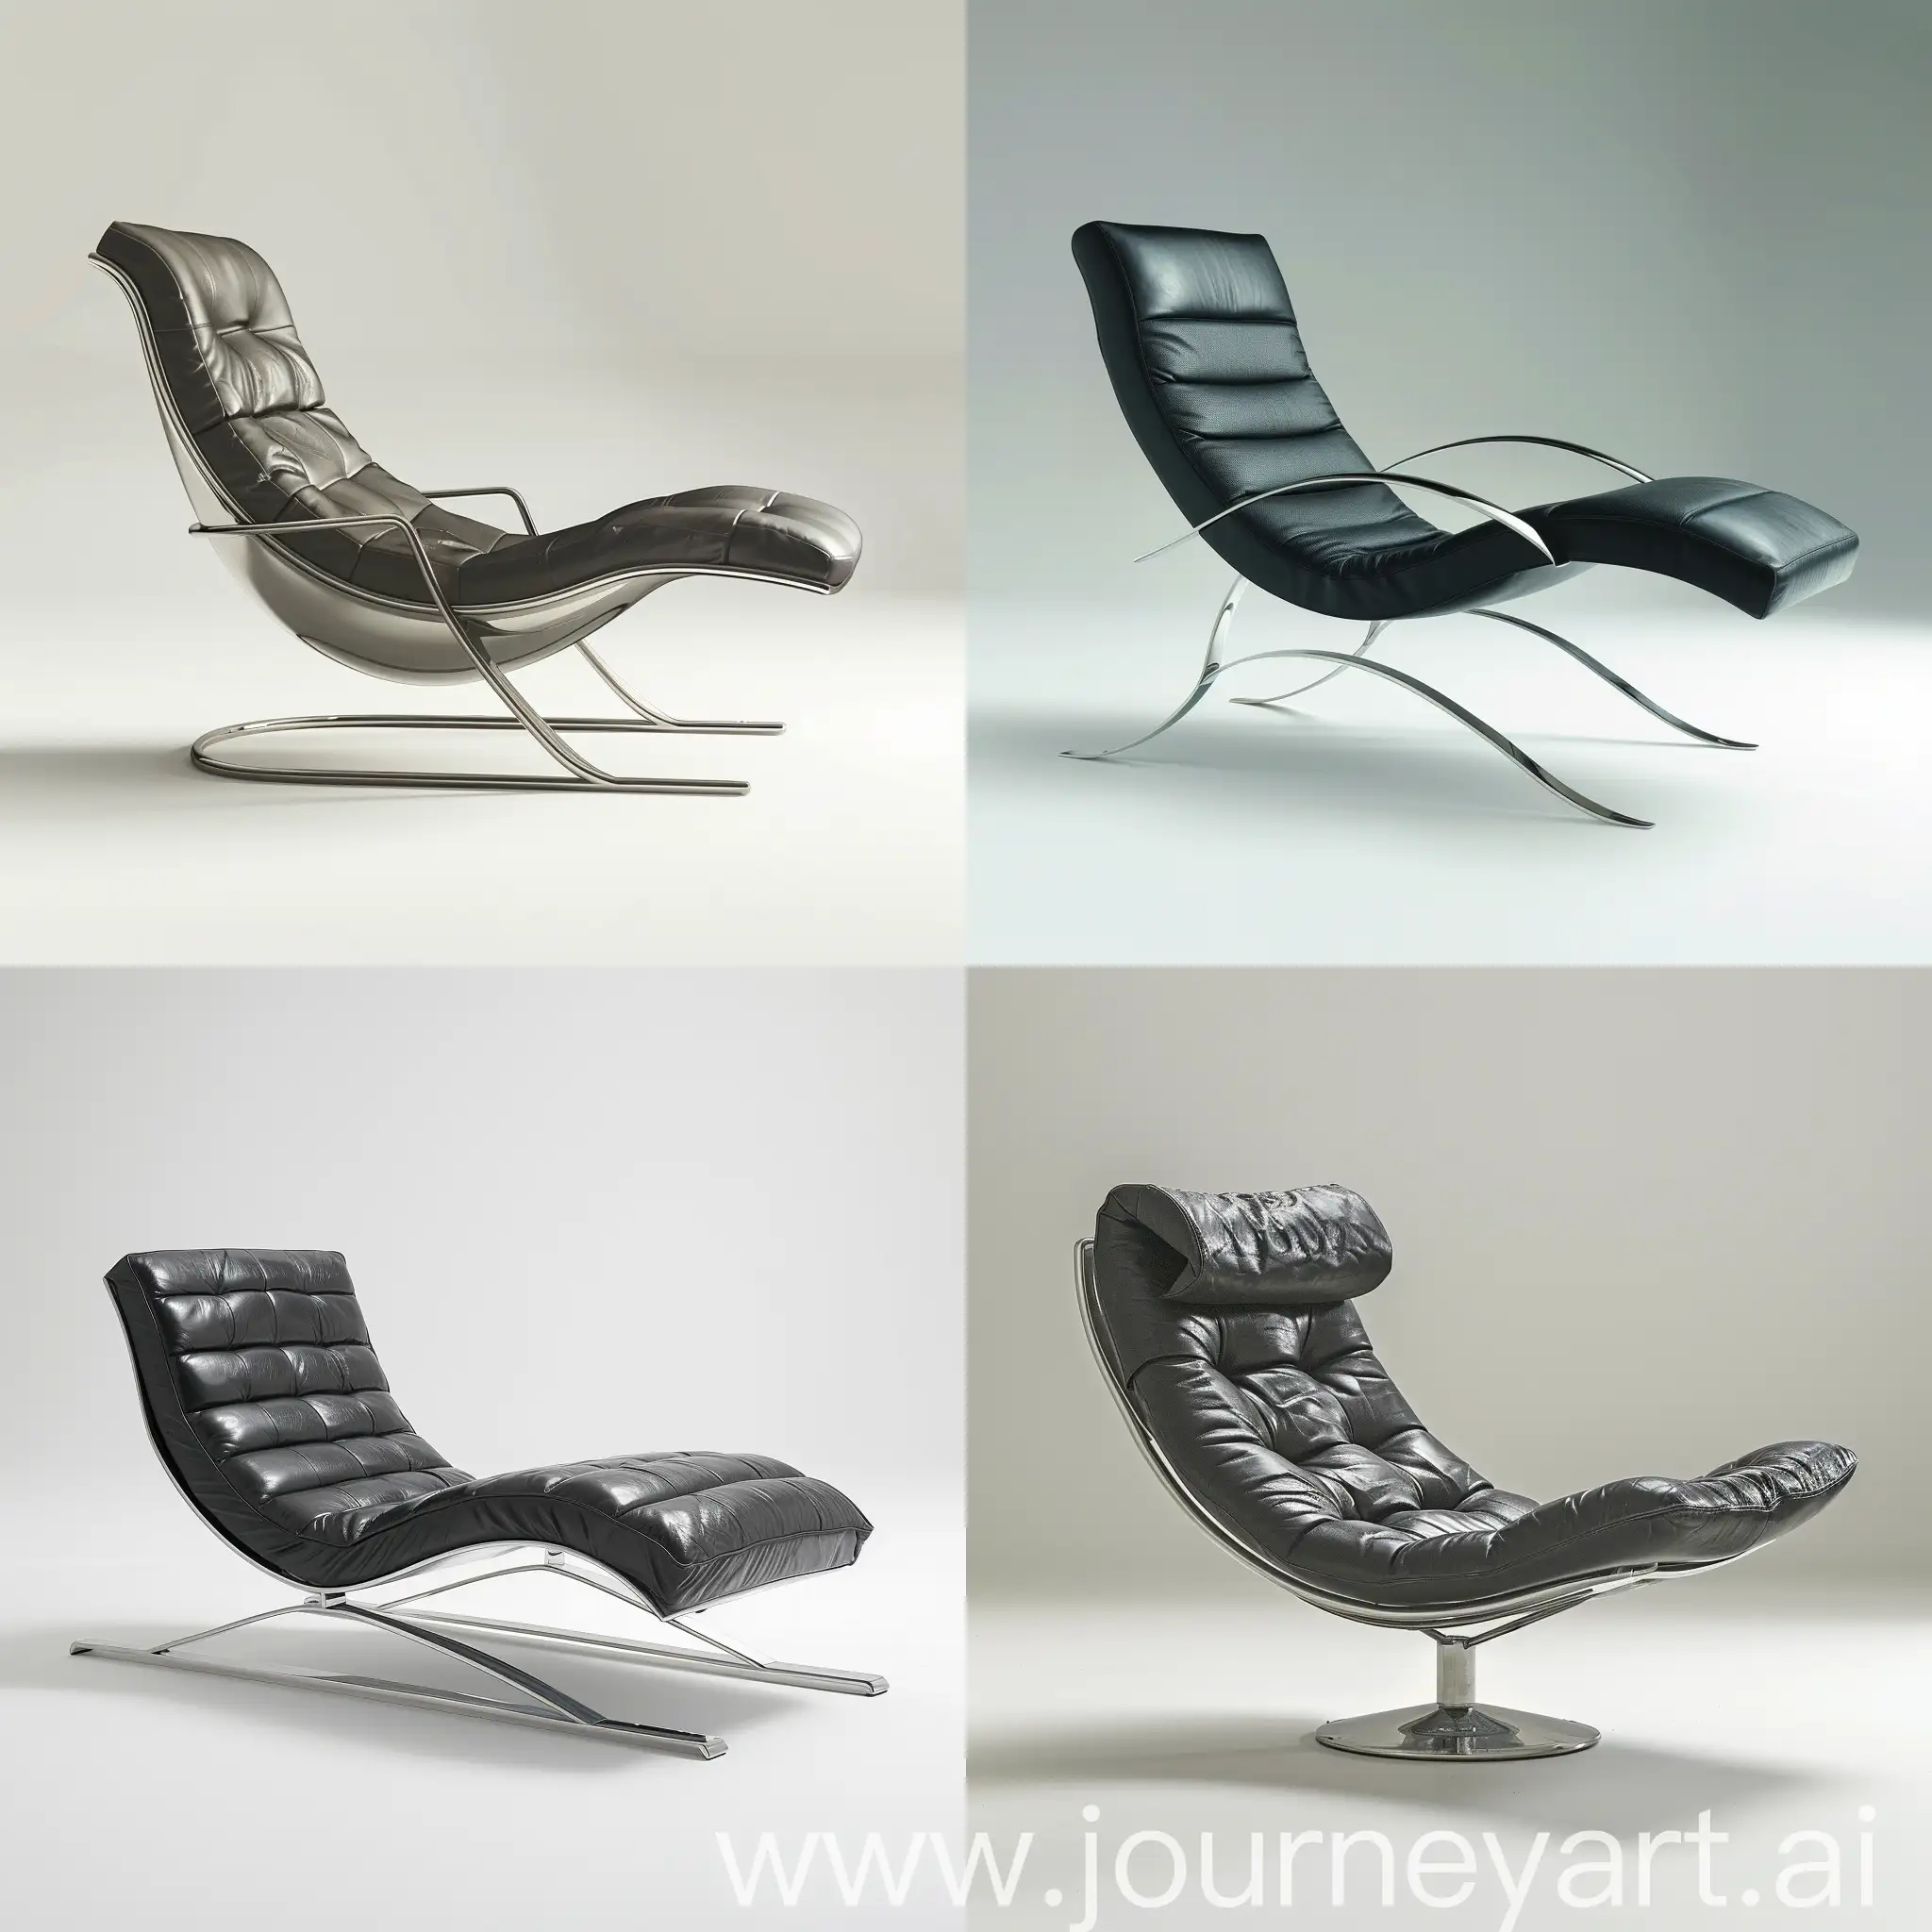 a product photo of a lounge chair on a white background, the chair is made out of black leather and chrome metal, and it is modern, it is all alone in a white room, nothing else in the background